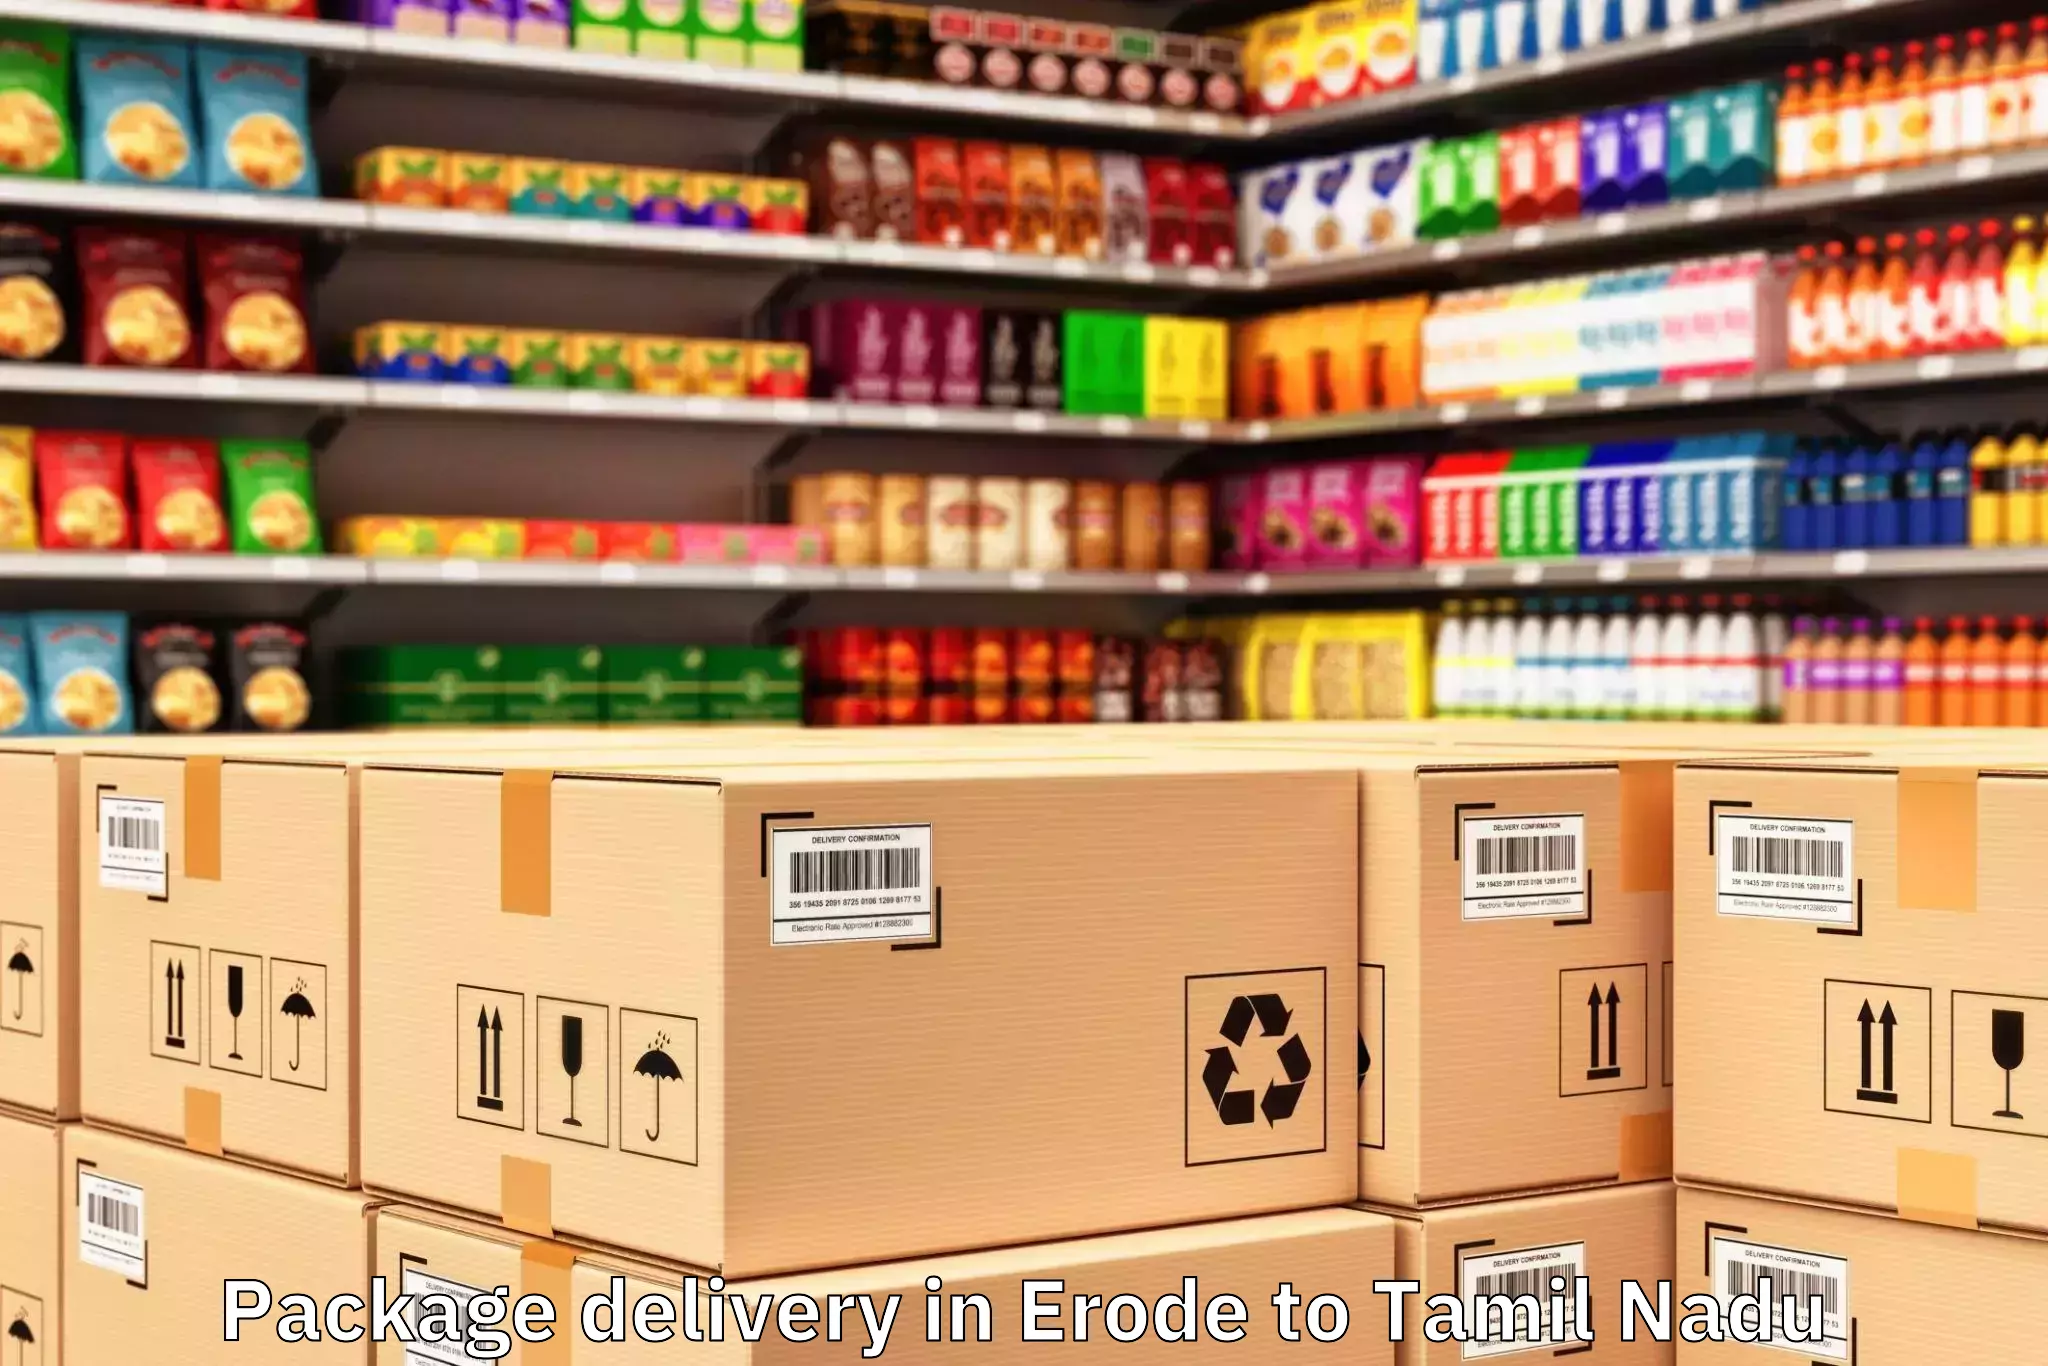 Easy Erode to Tamil Nadu Package Delivery Booking